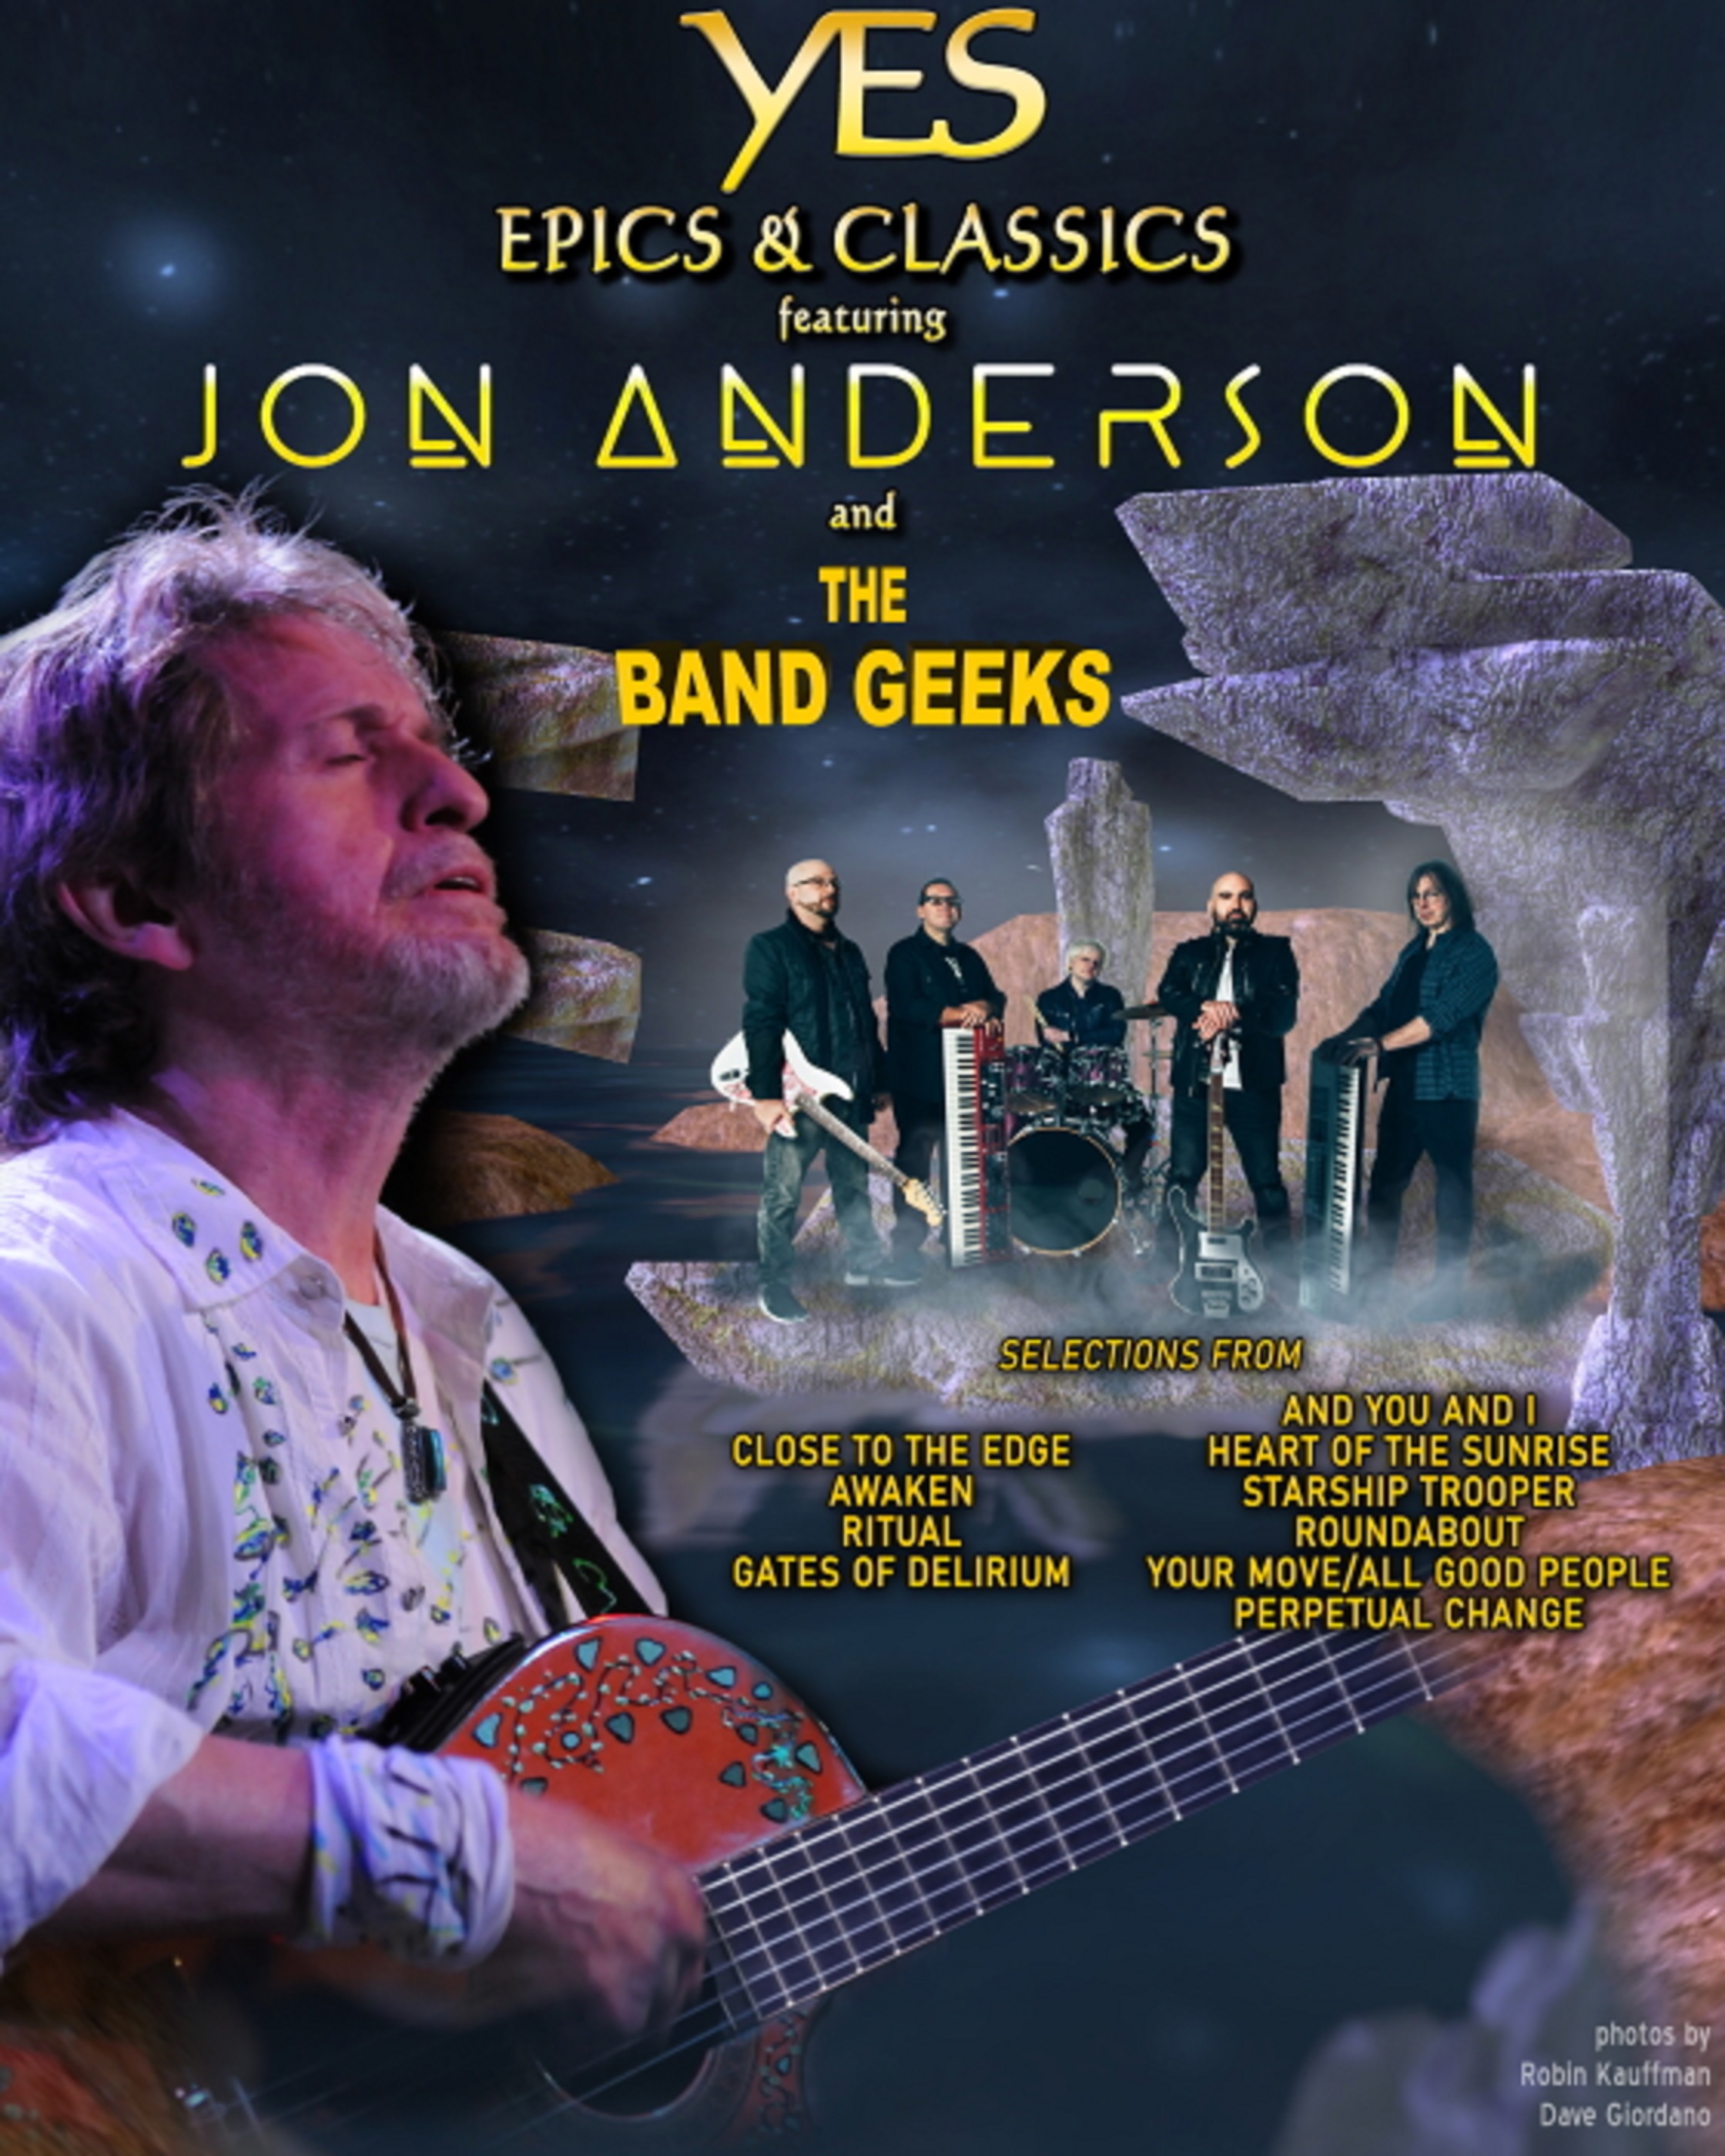 YES Legend Jon Anderson To Tour With The Band Geeks Spring 2023!